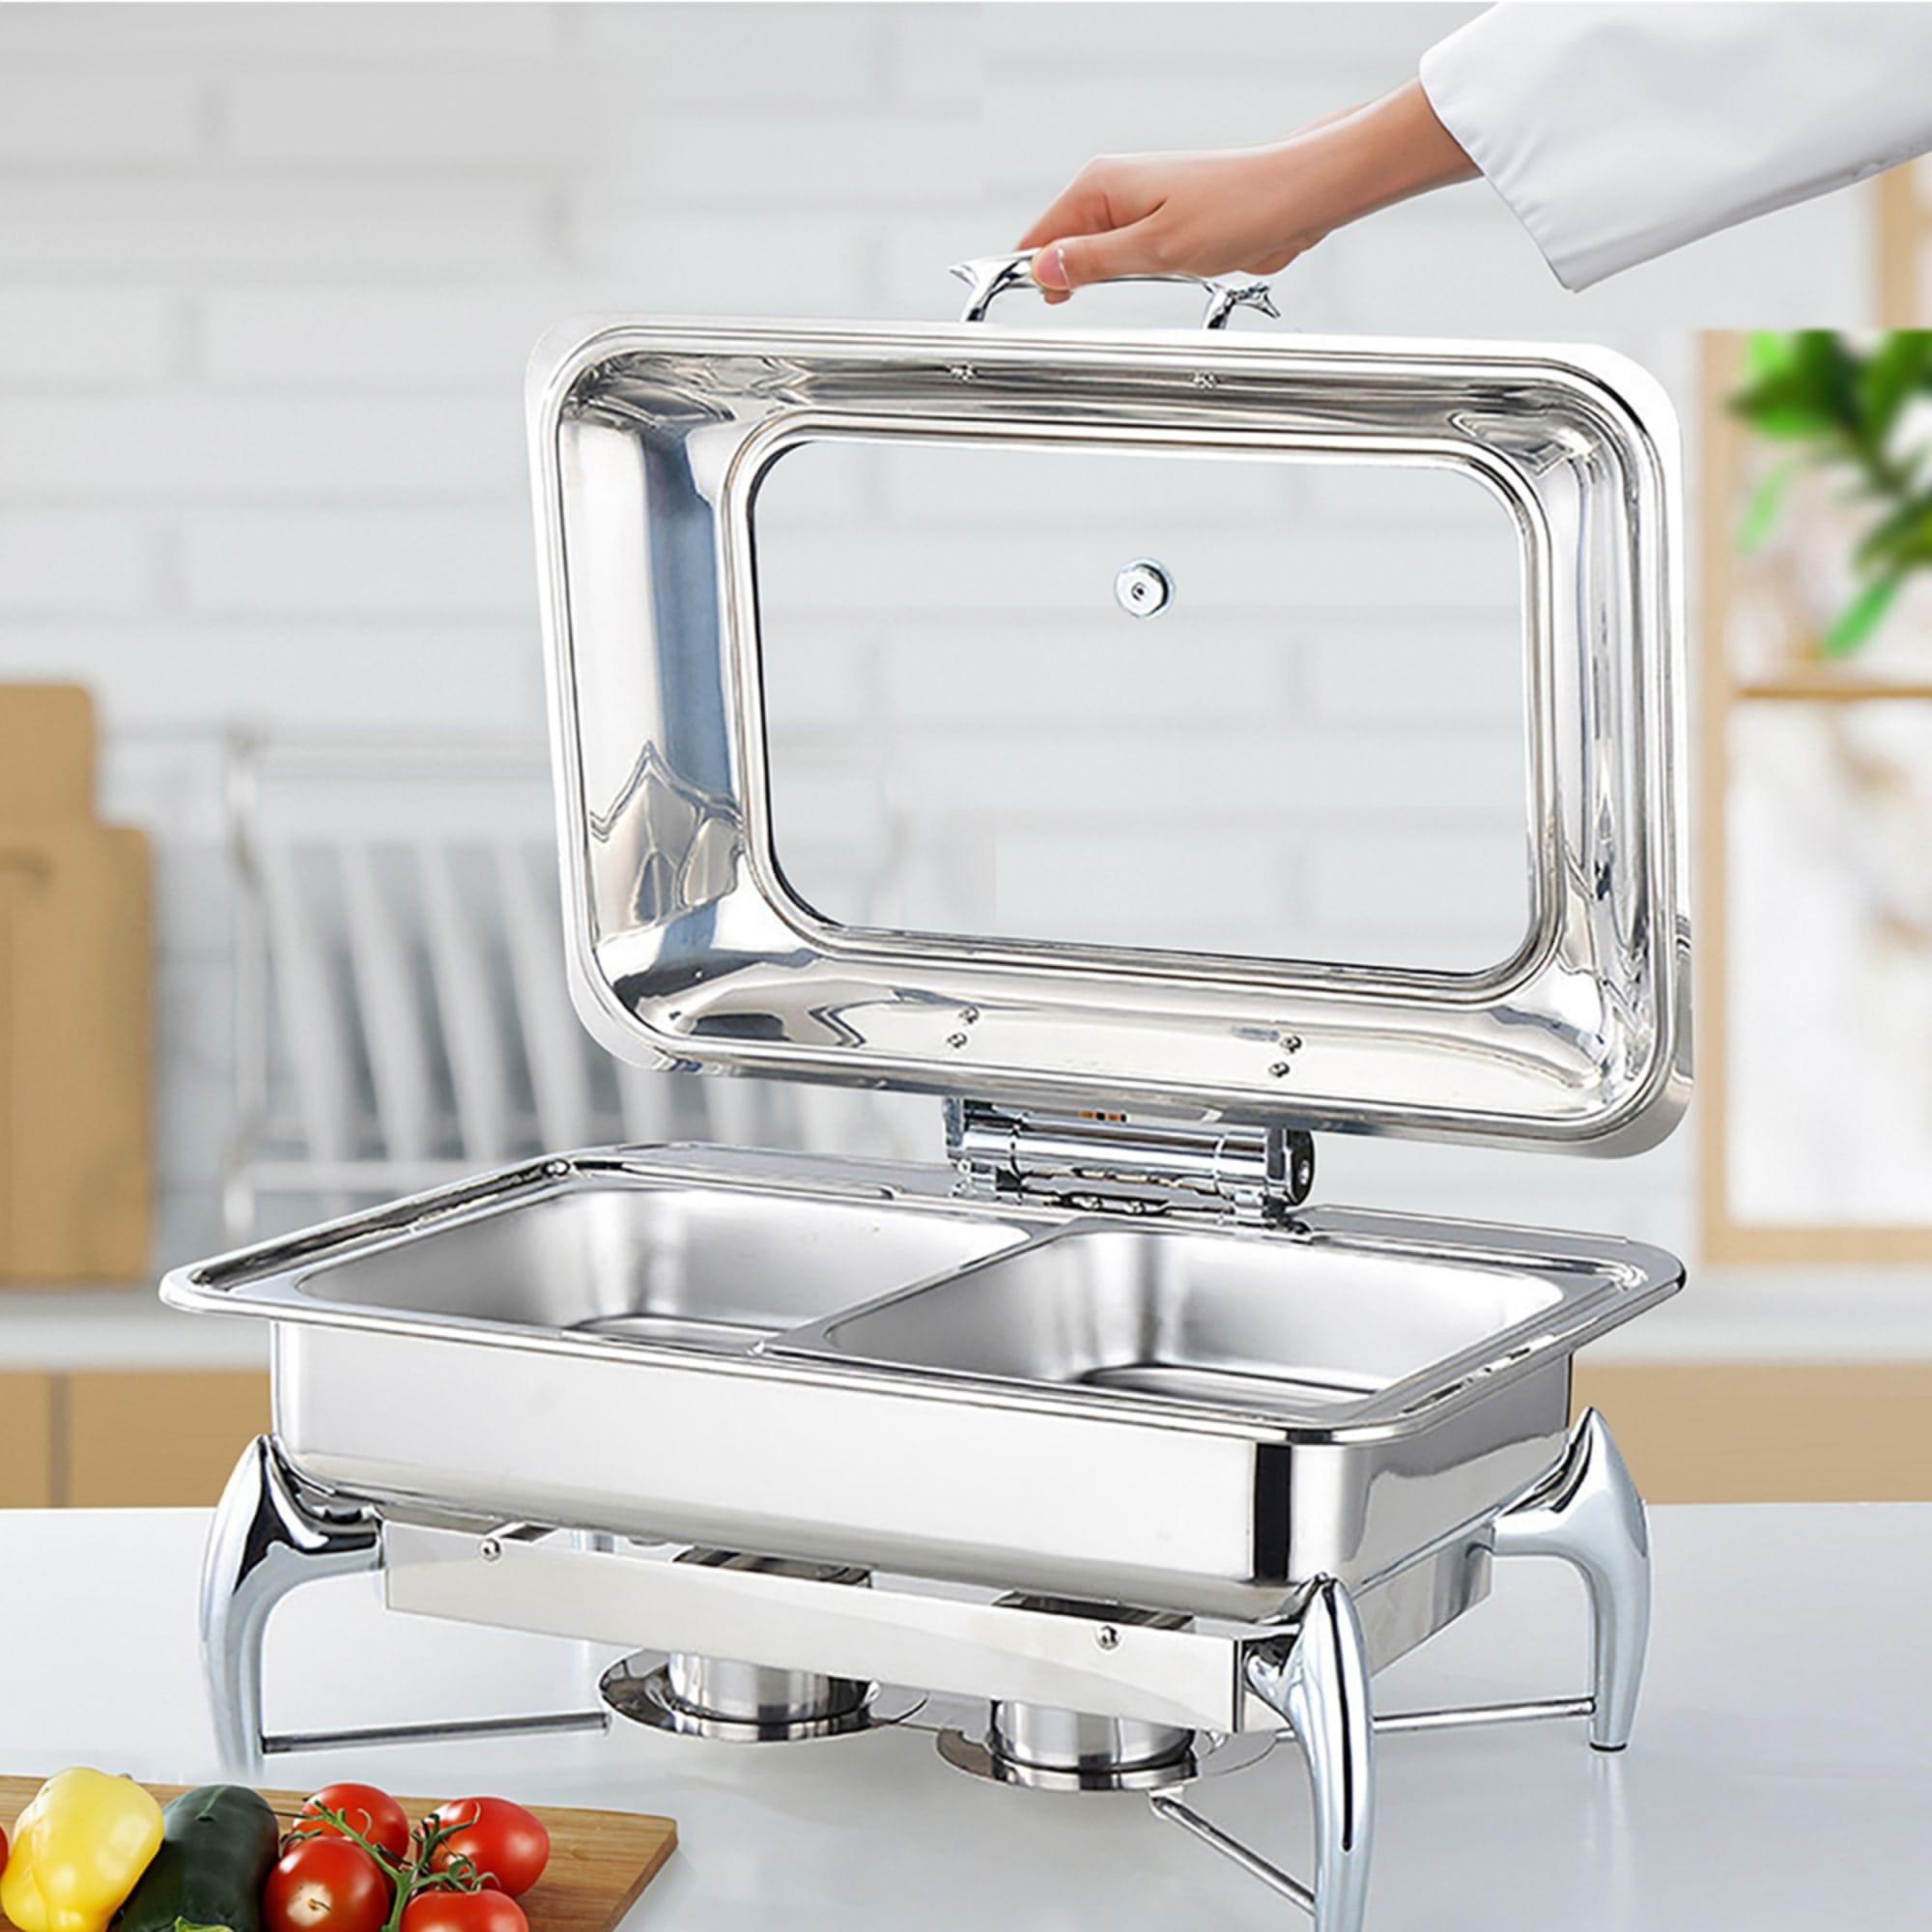 Soga Rectangular Stainless Steel Chafing Dish with Top Lid Set of 2 Image 7